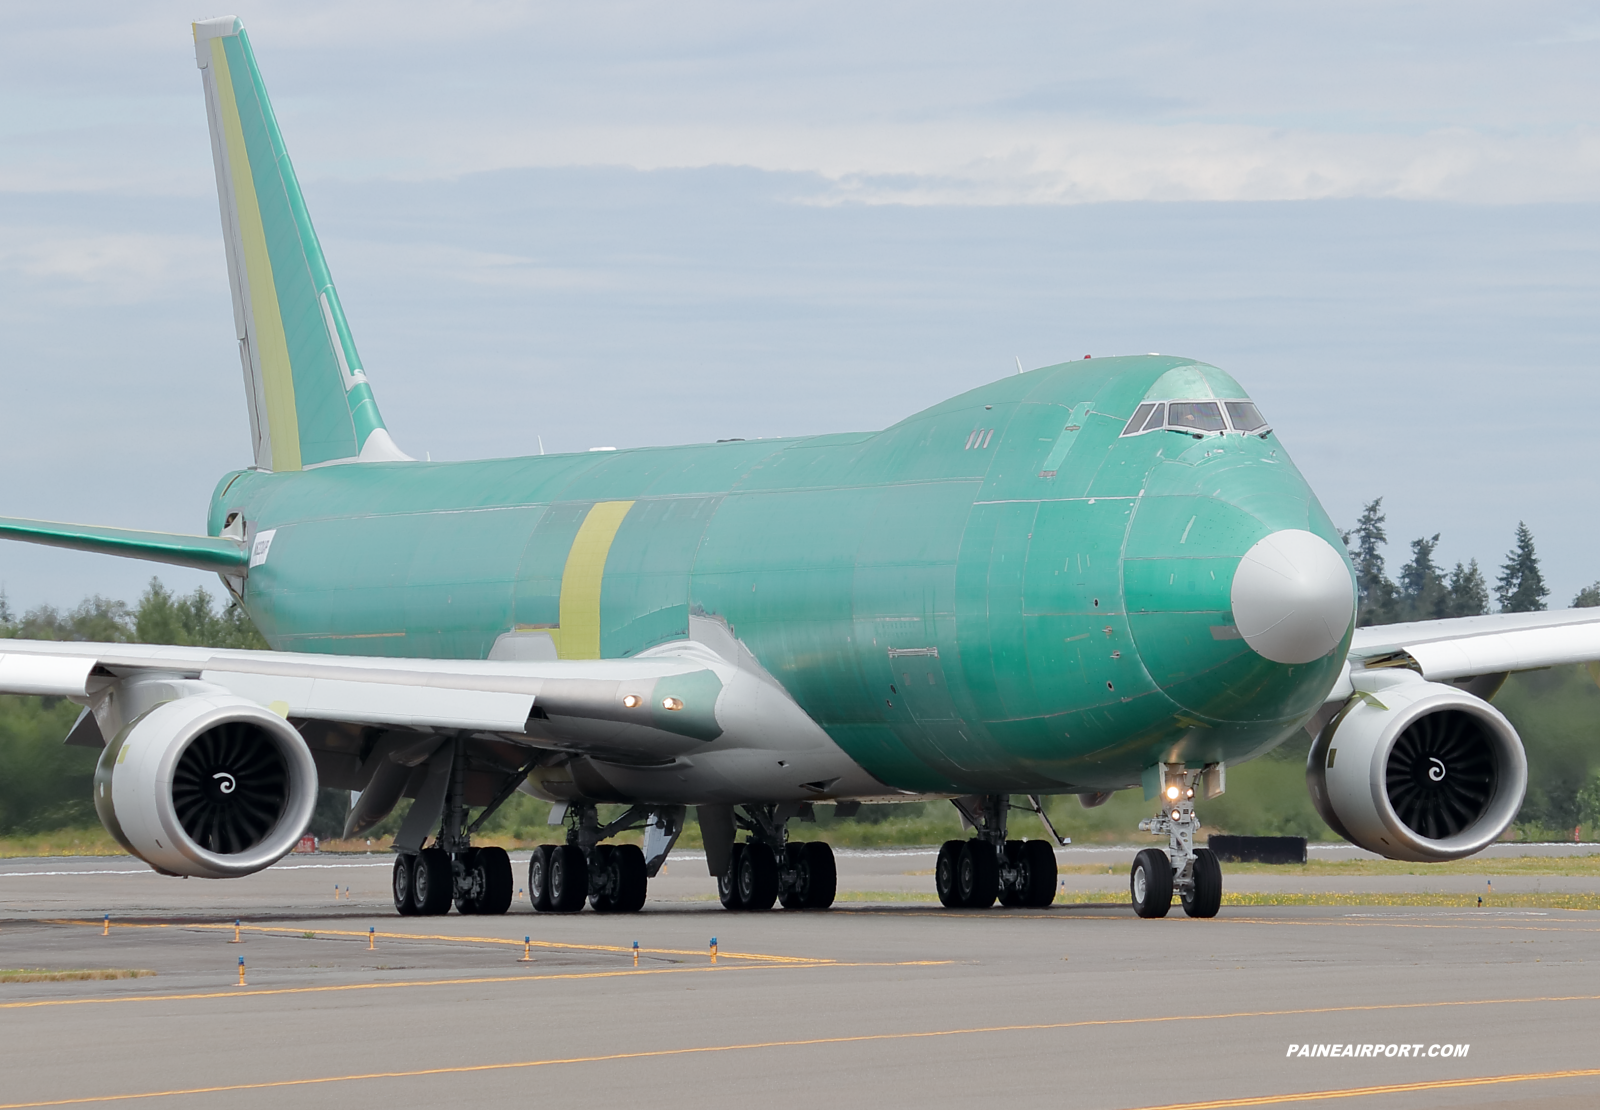 UPS 747-8F N622UP at KPAE Paine Field 